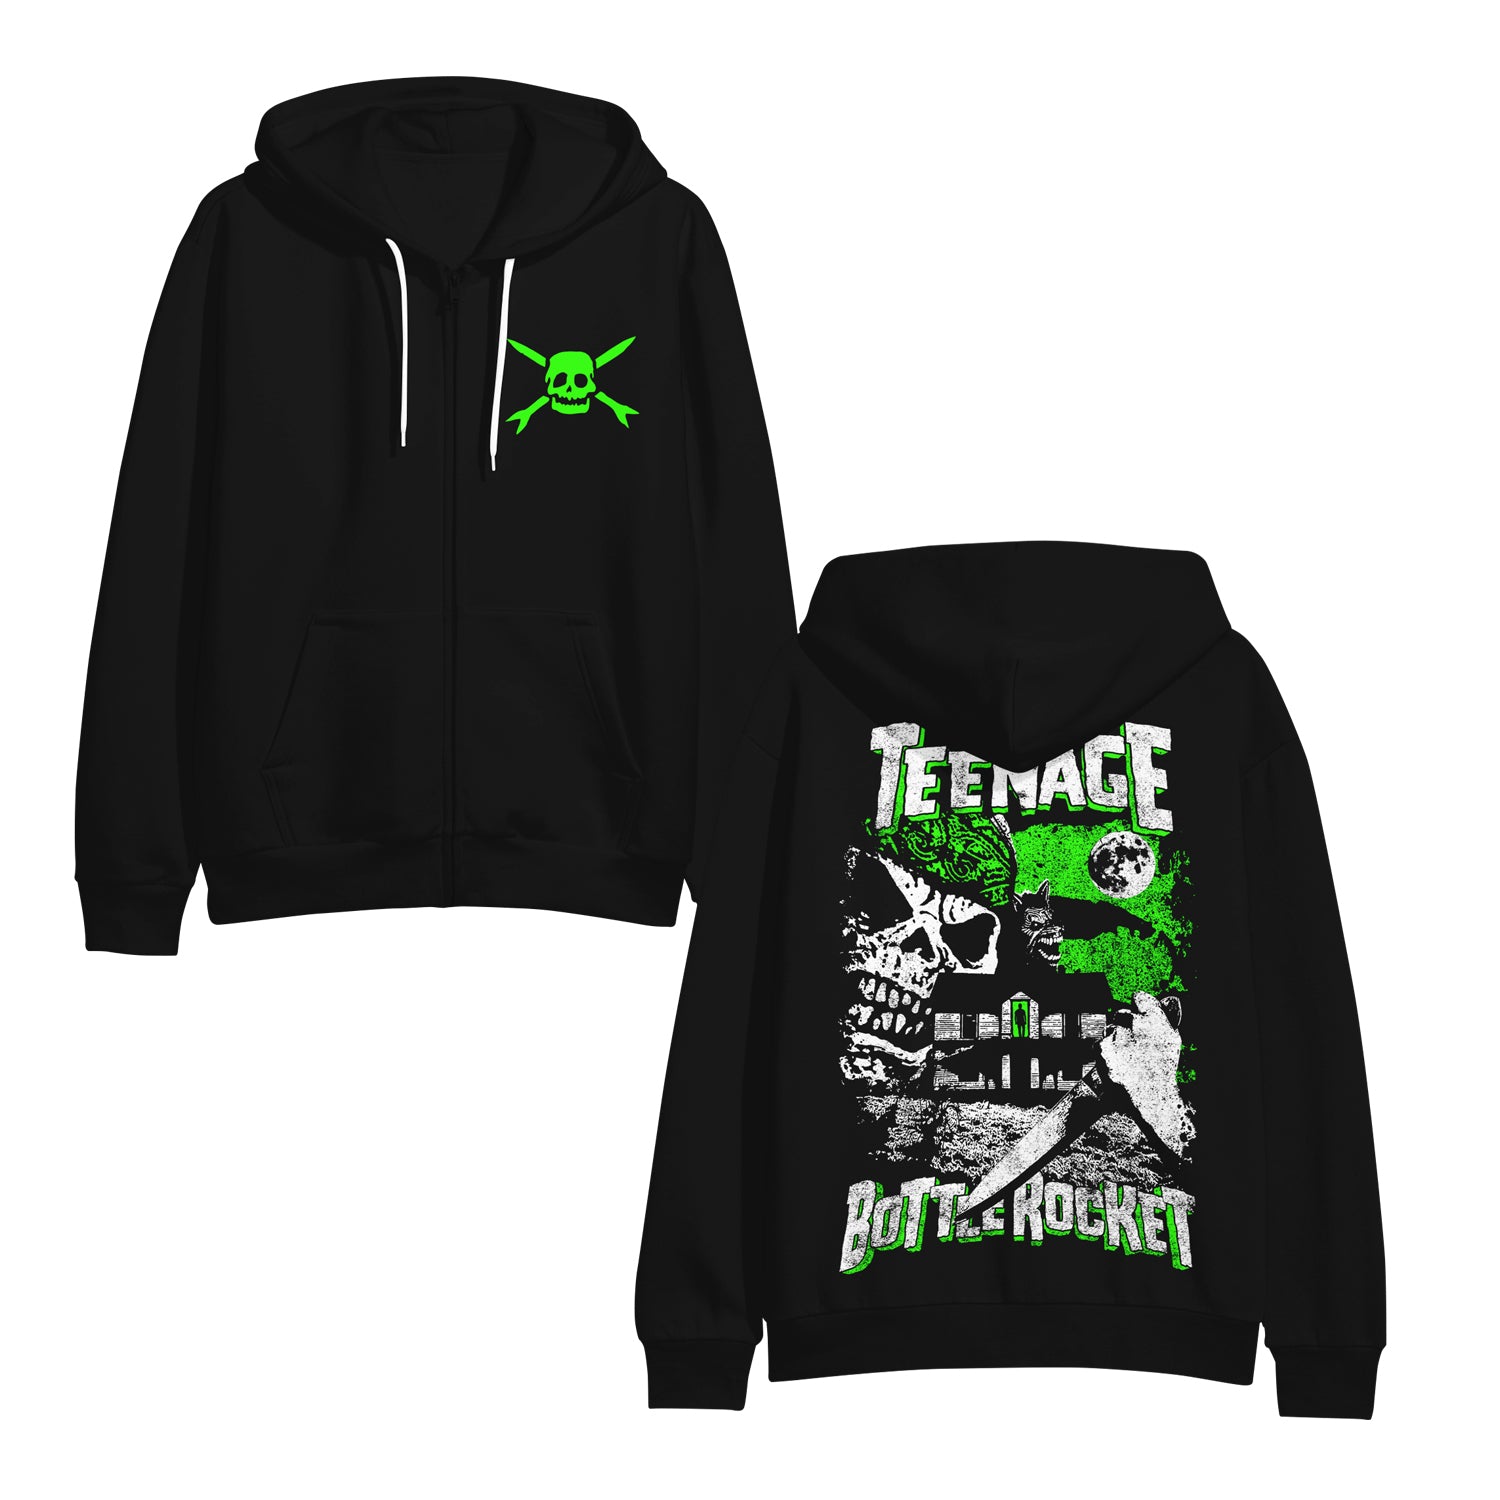 Image of the front and back of a black hooded sweatshirt against a white background. The front of the sweatshirt has white strings. The left chest has the teenage bottlerocket logo of a skull head with cross arrows. The back of the sweatshirt says teenage bottlerocket in white distressed letters with a green outline. teenage is at the top, bottlerocket is at the bottom. In the middle of these words is a giant skull face looking at a haunted house. There is a full moon and a person's hand holding a knife.